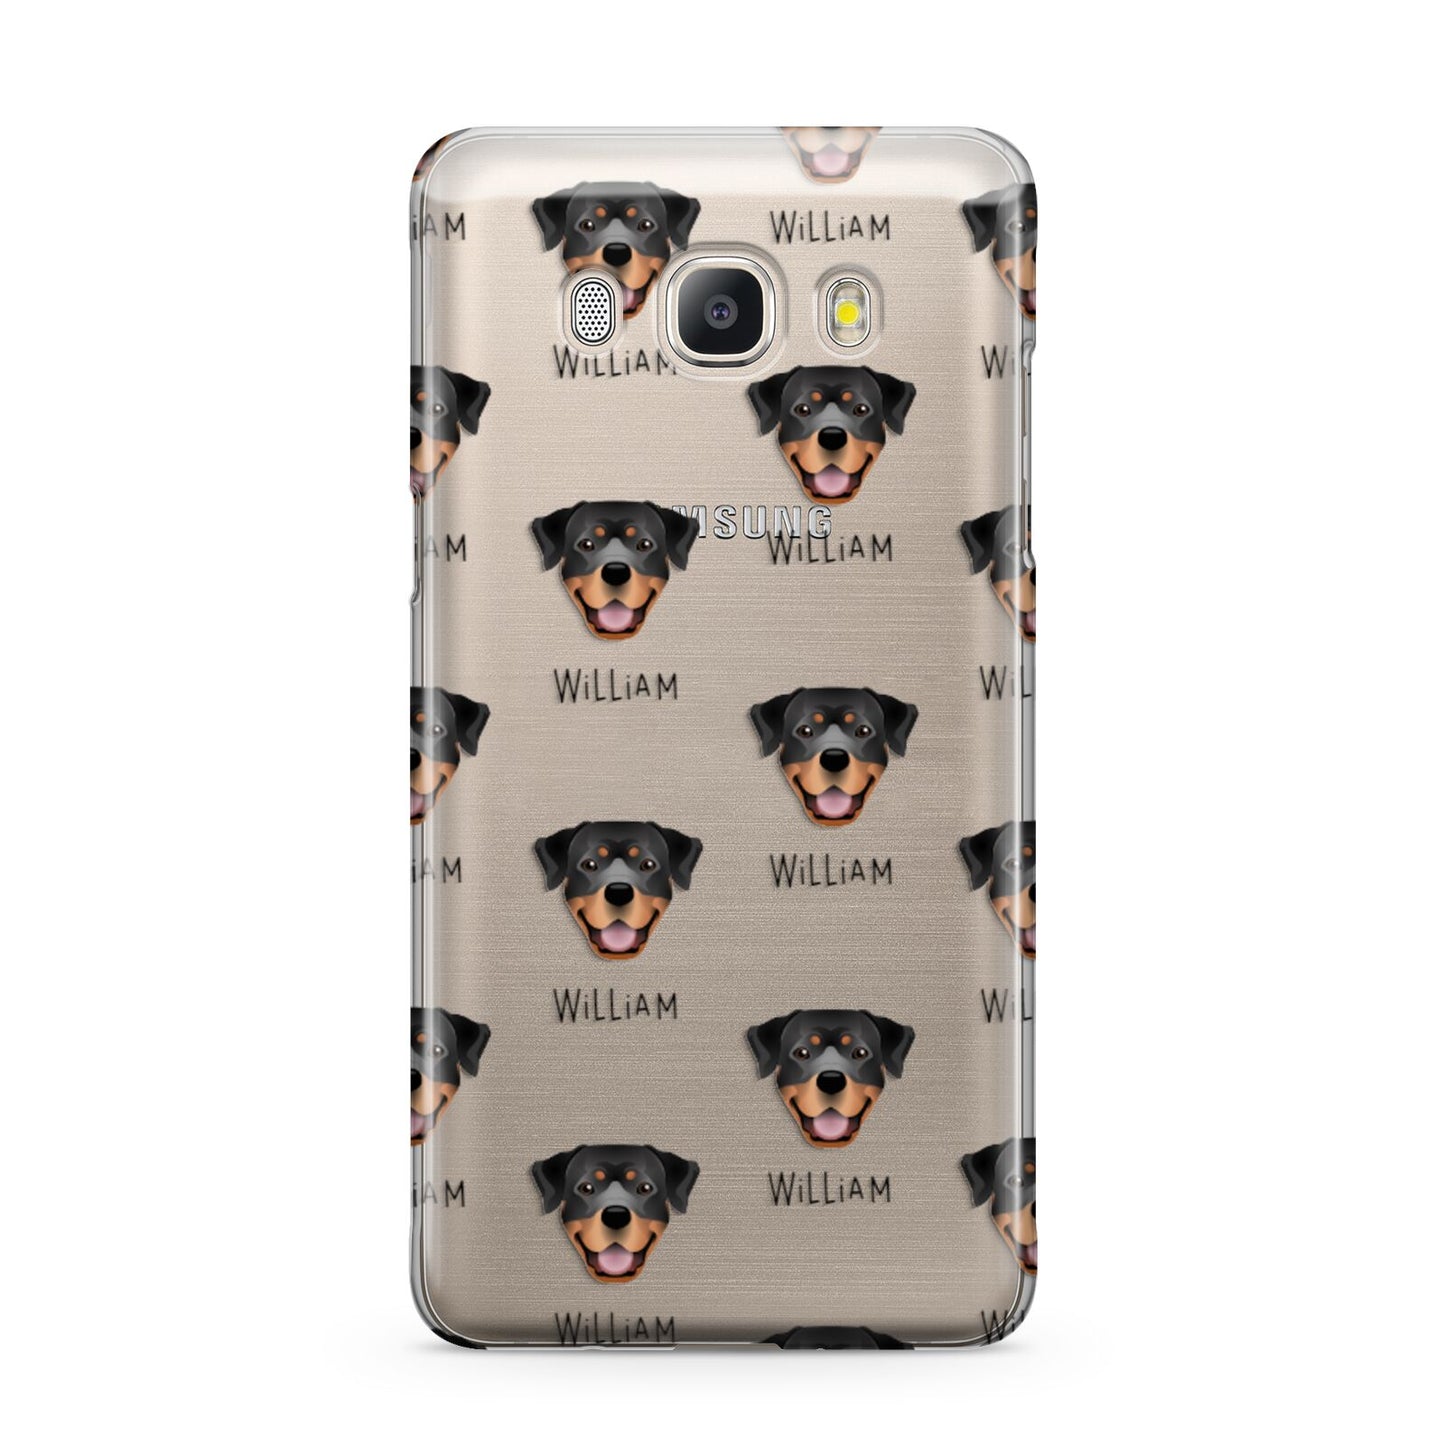 Rottweiler Icon with Name Samsung Galaxy J5 2016 Case